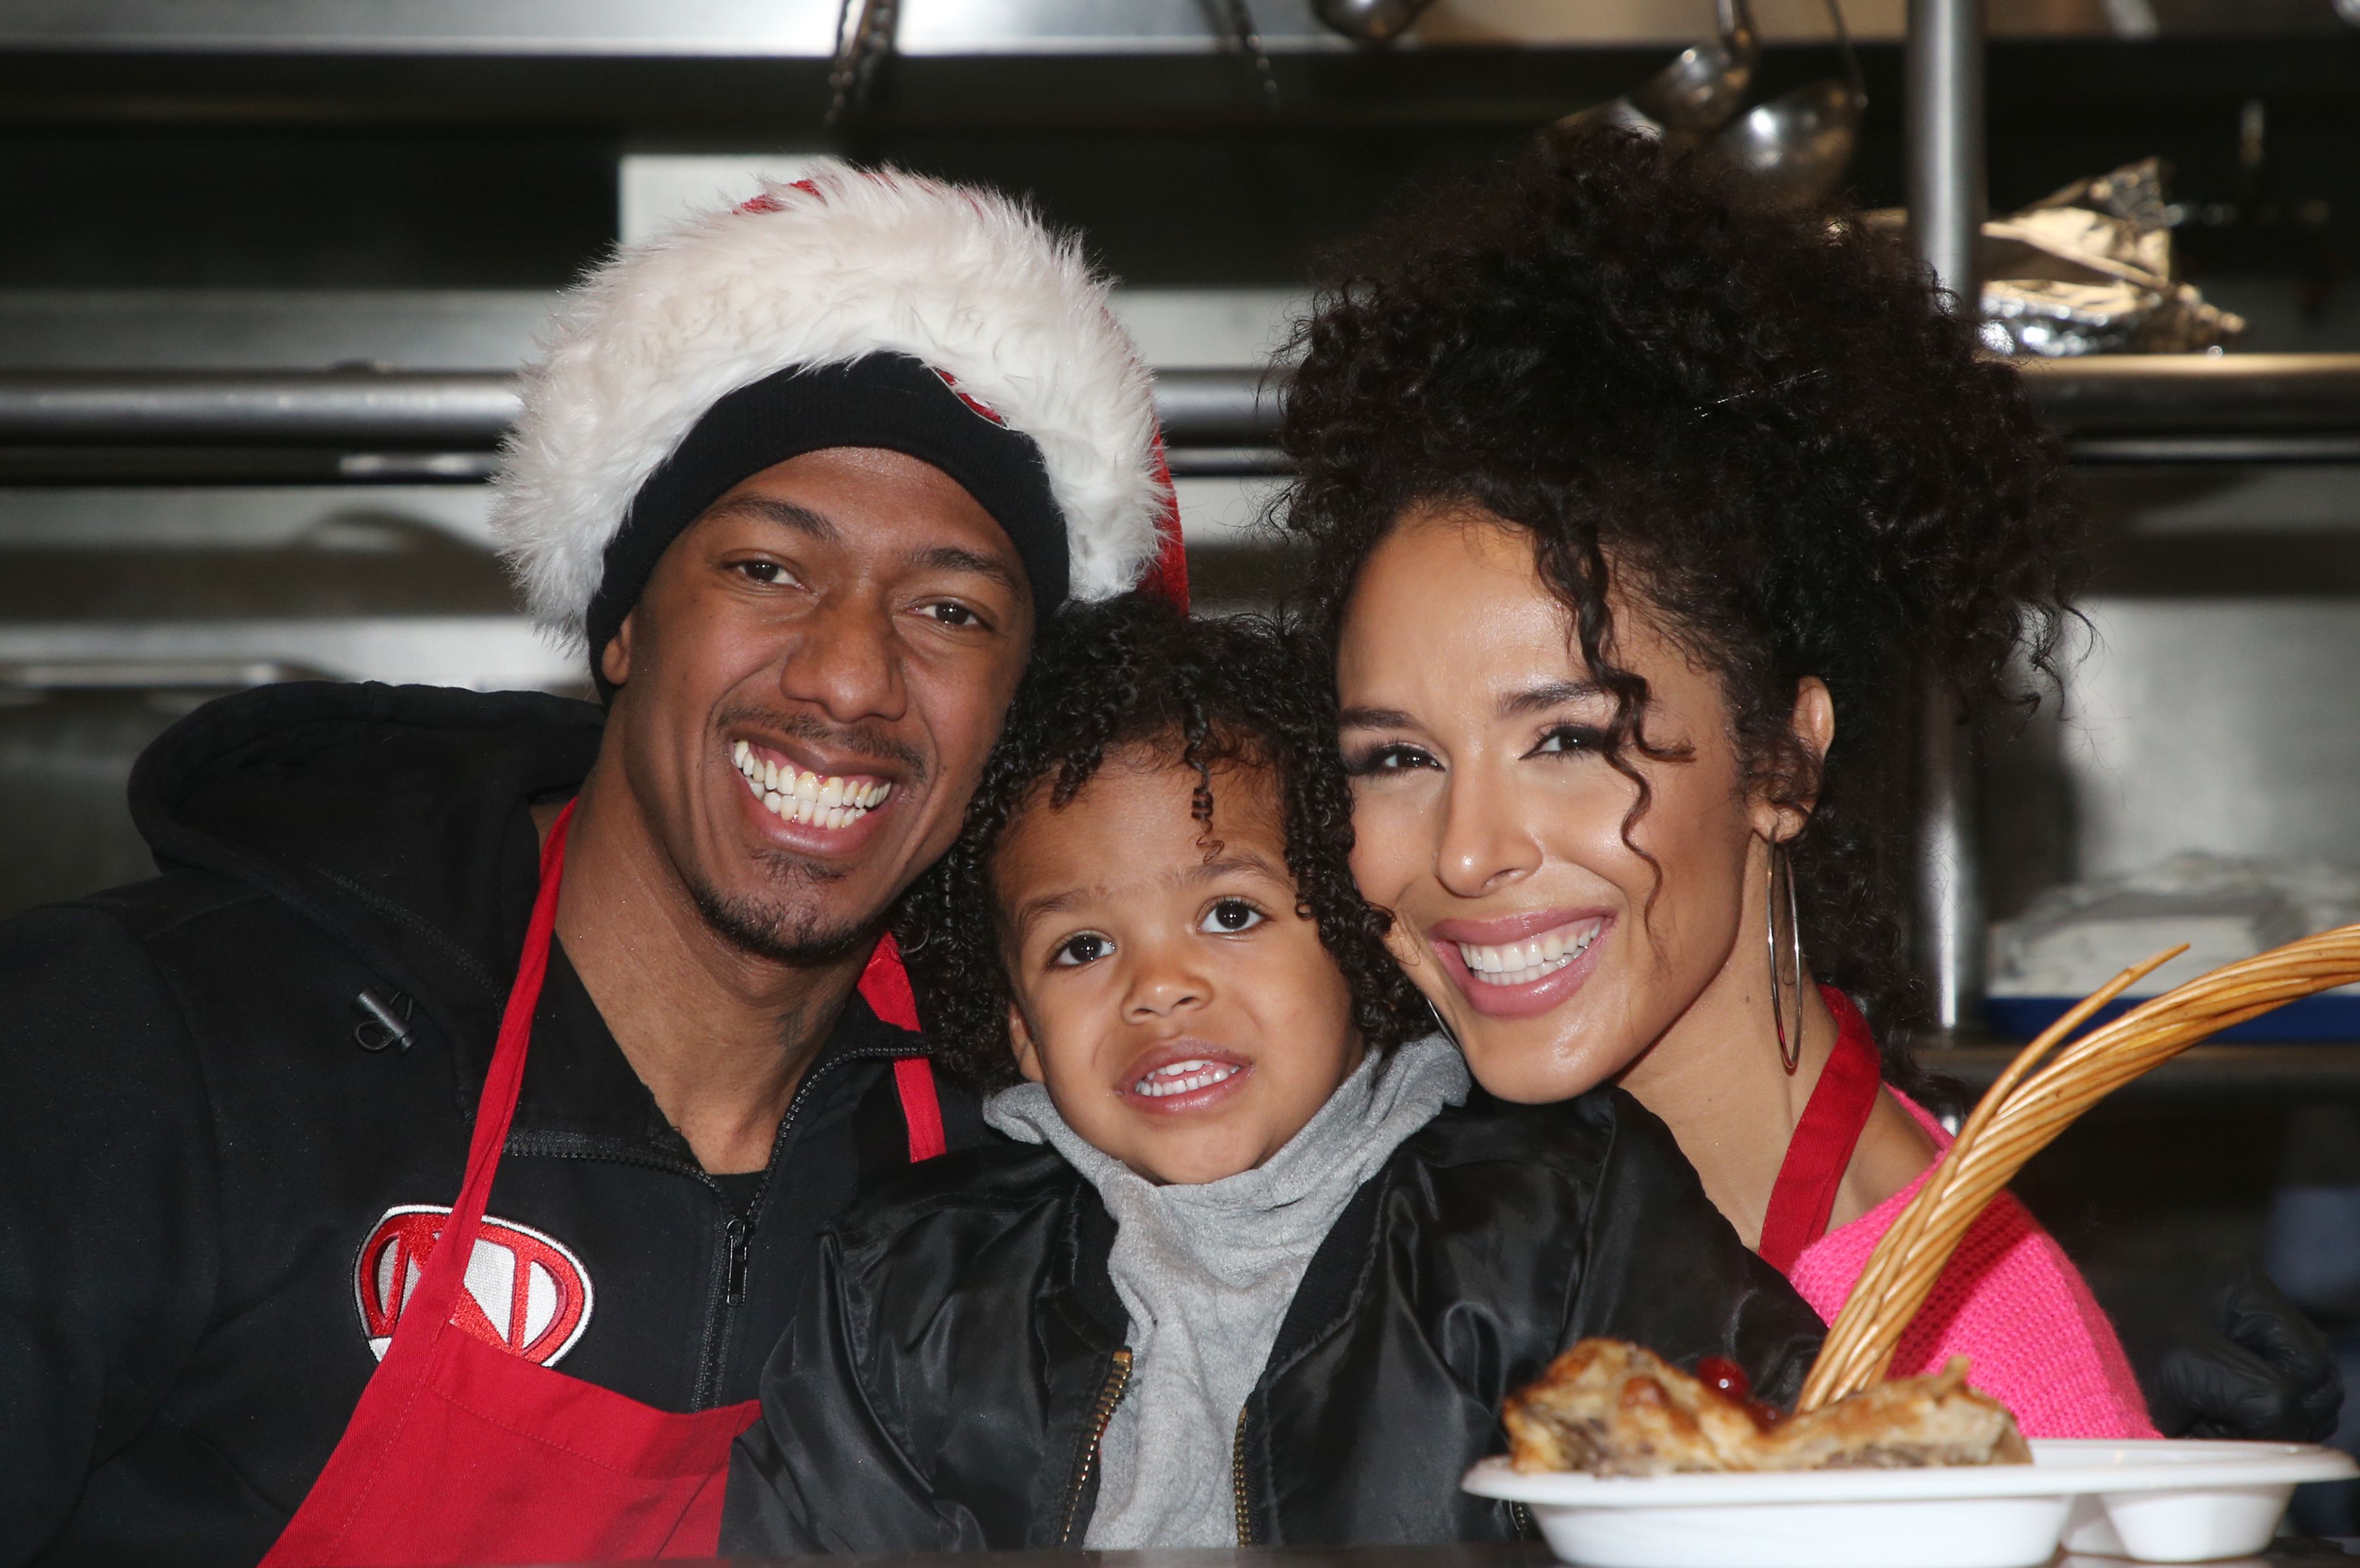 Nick Cannon, Golden Cannon, and Brittany Bell